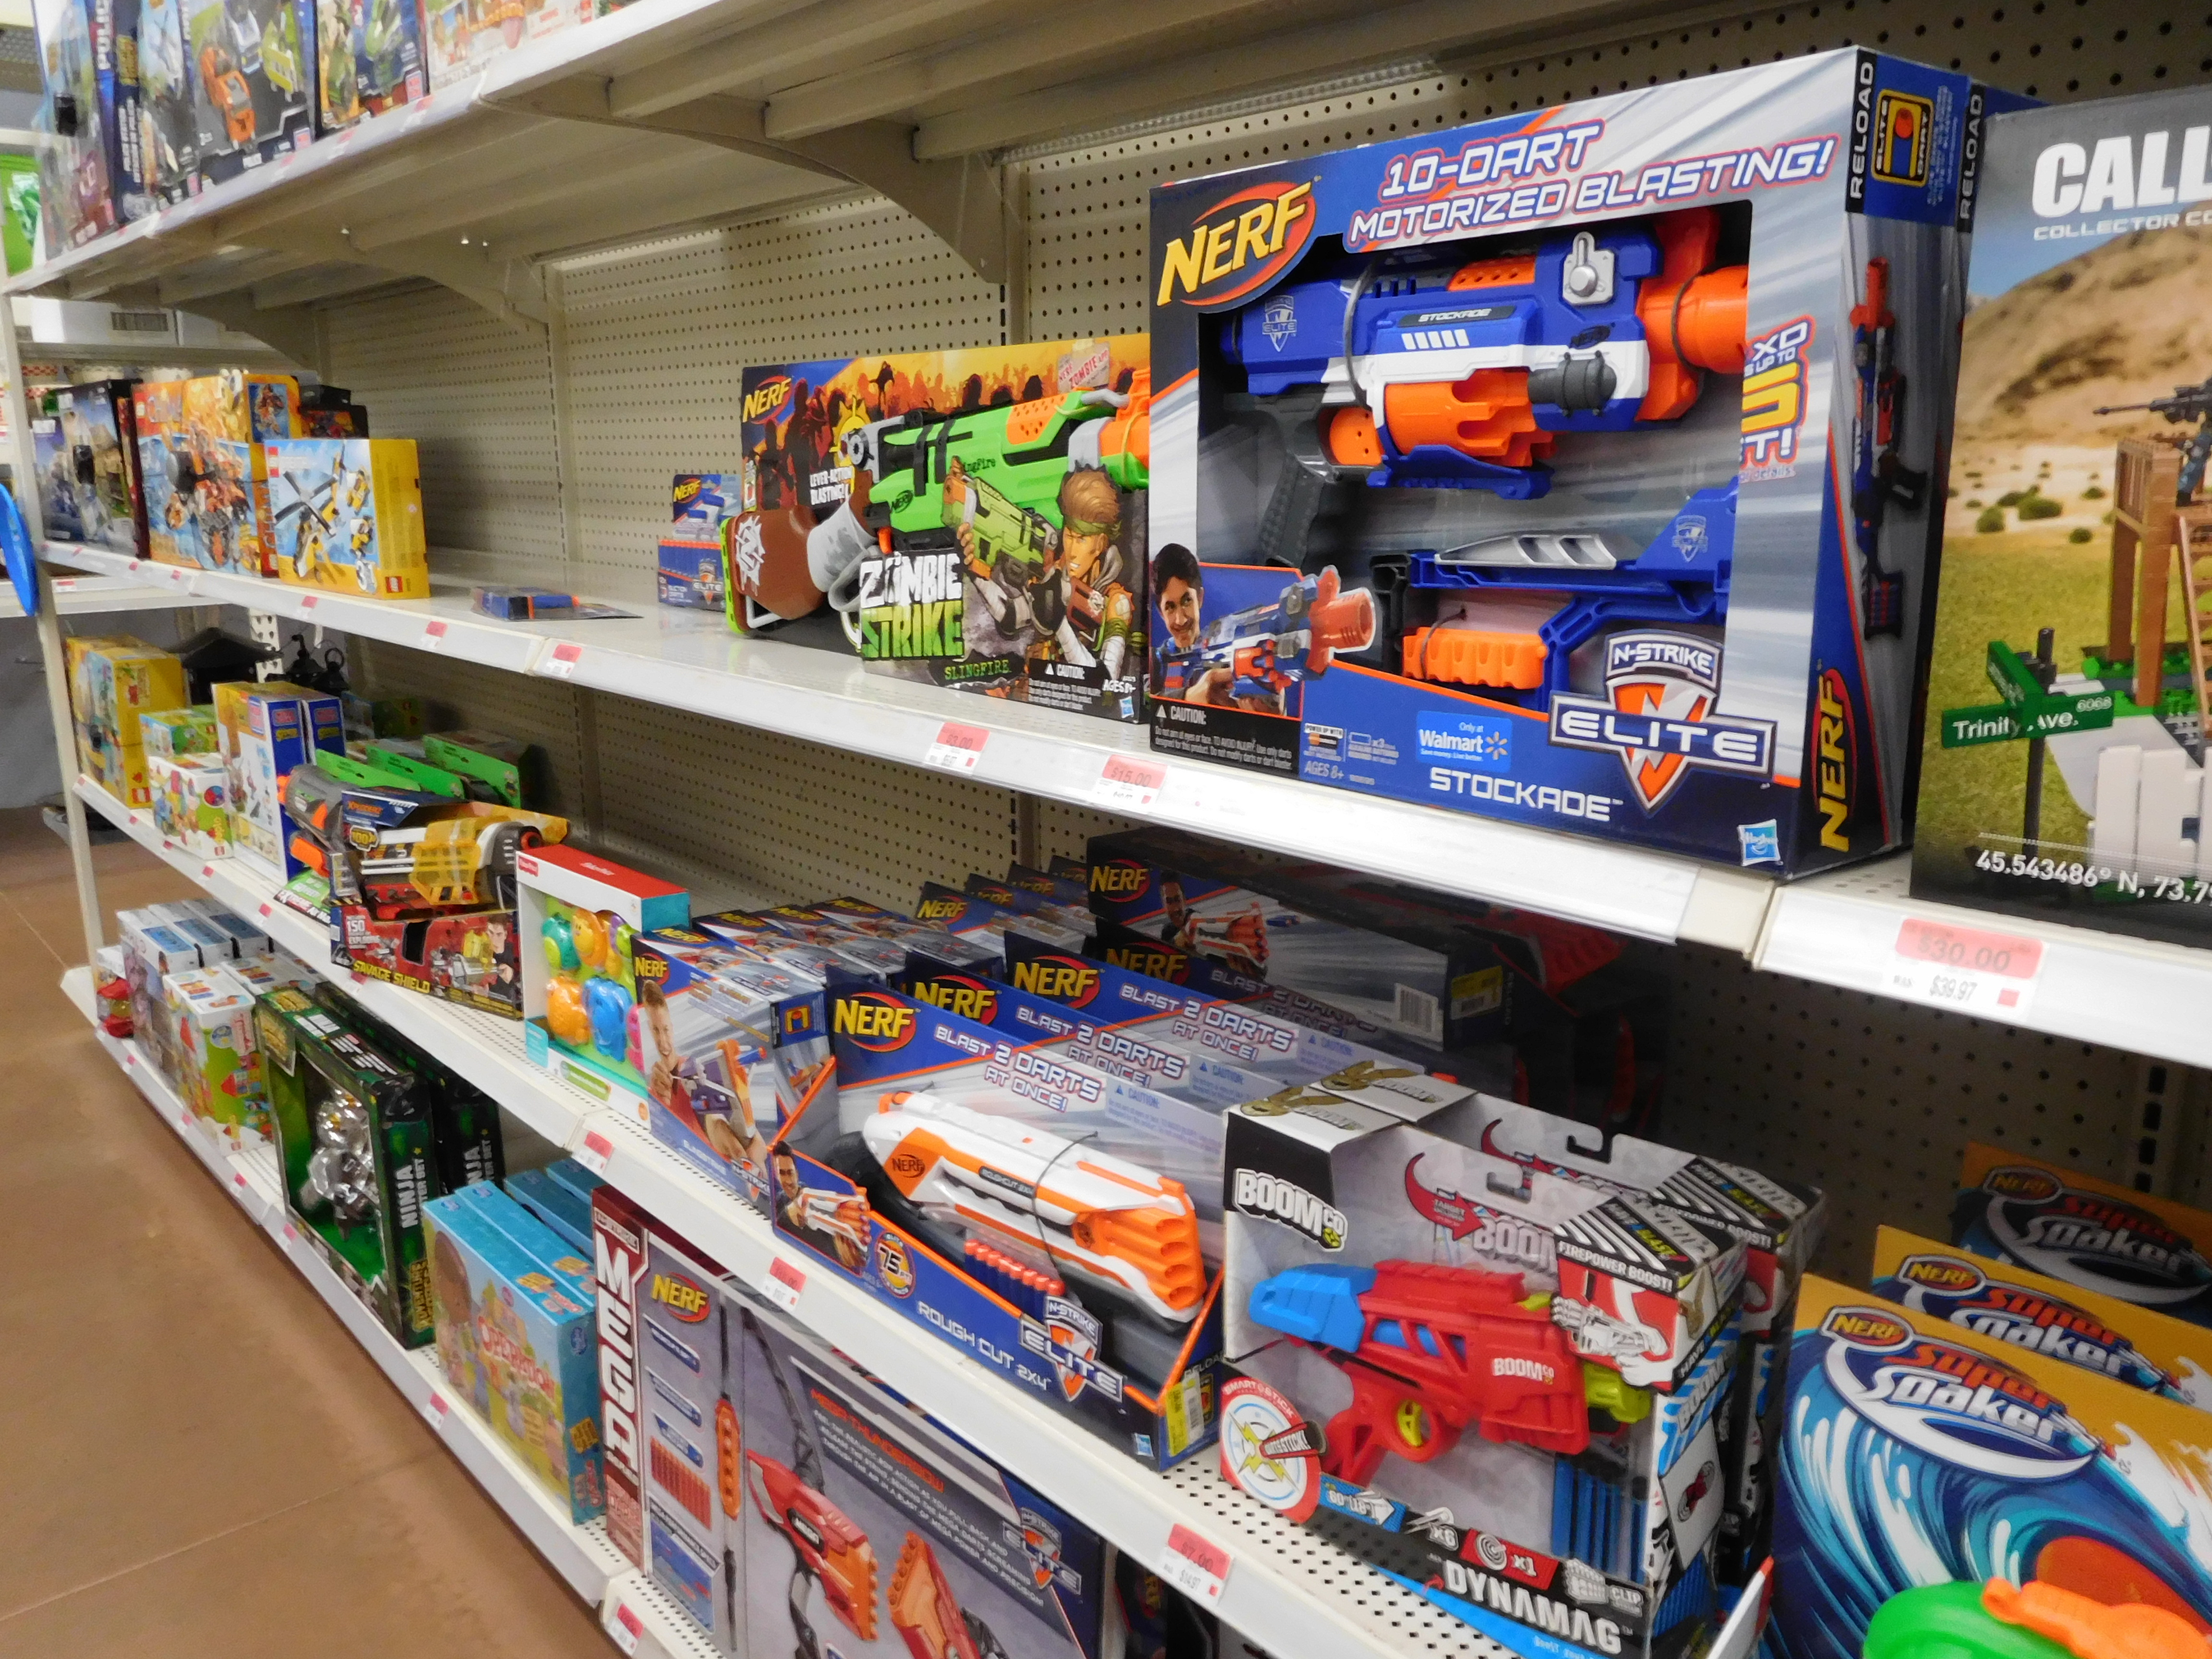 Walmart Tipton - Toys has taken over our Clearance section! From